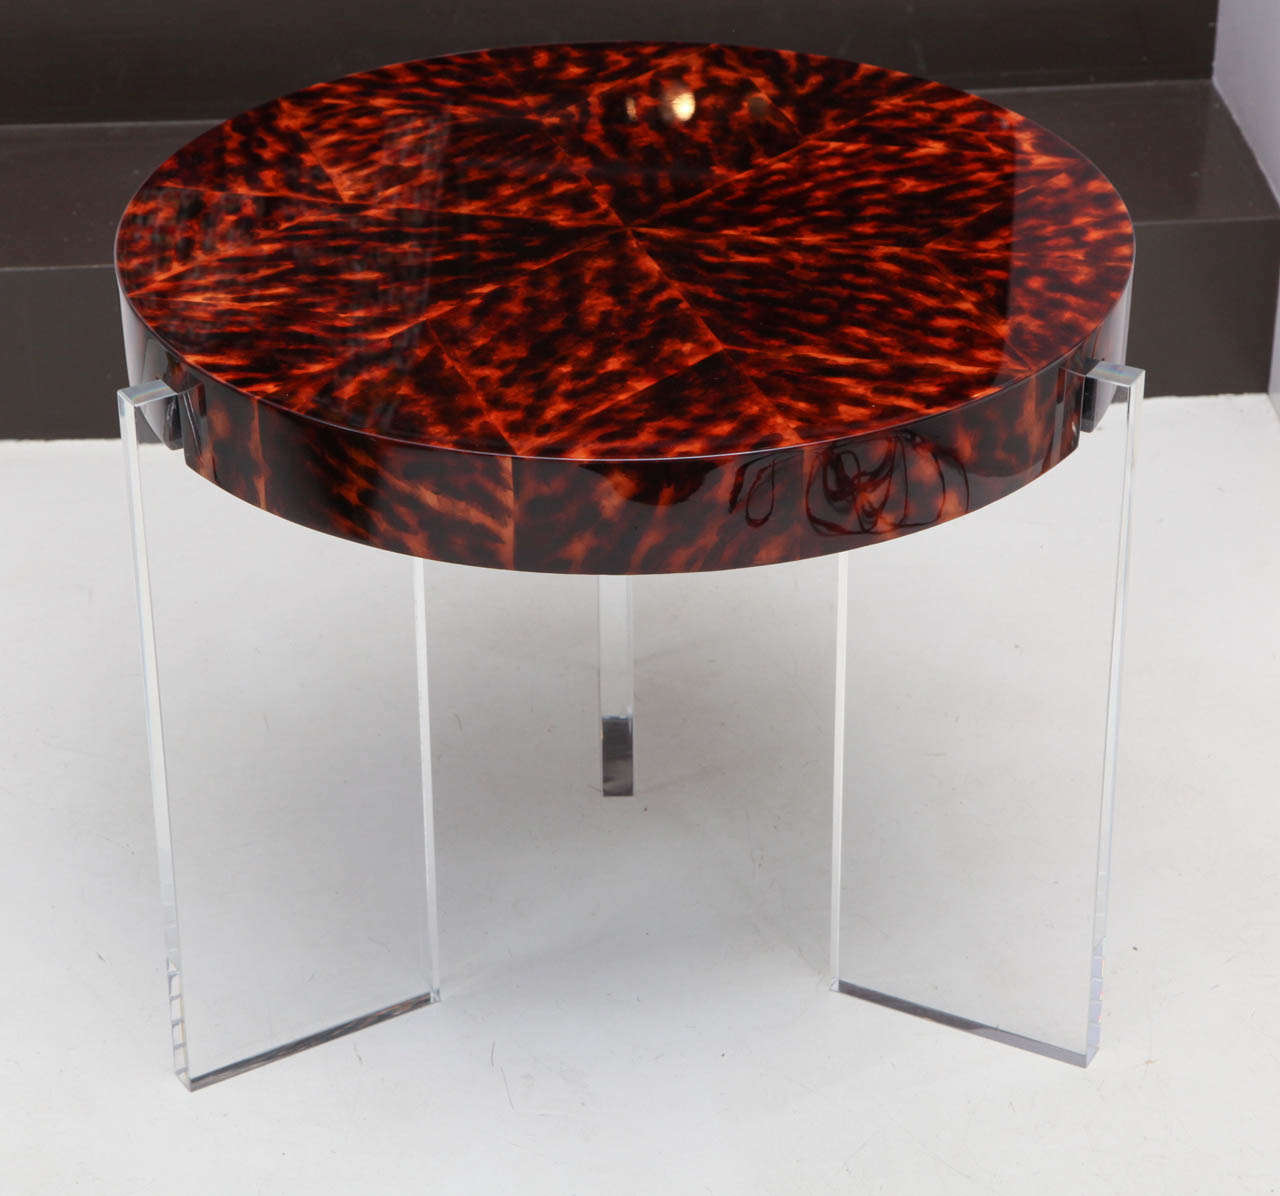 LIZ O'BRIEN EDITIONS
Round occasional table raised on three acrylic legs.
Tabletop is faux-painted to look like tortoiseshell with a high-glos lacquer finish
Custom finish and size requests can be accommodated.

“Glamorous and light-catching,